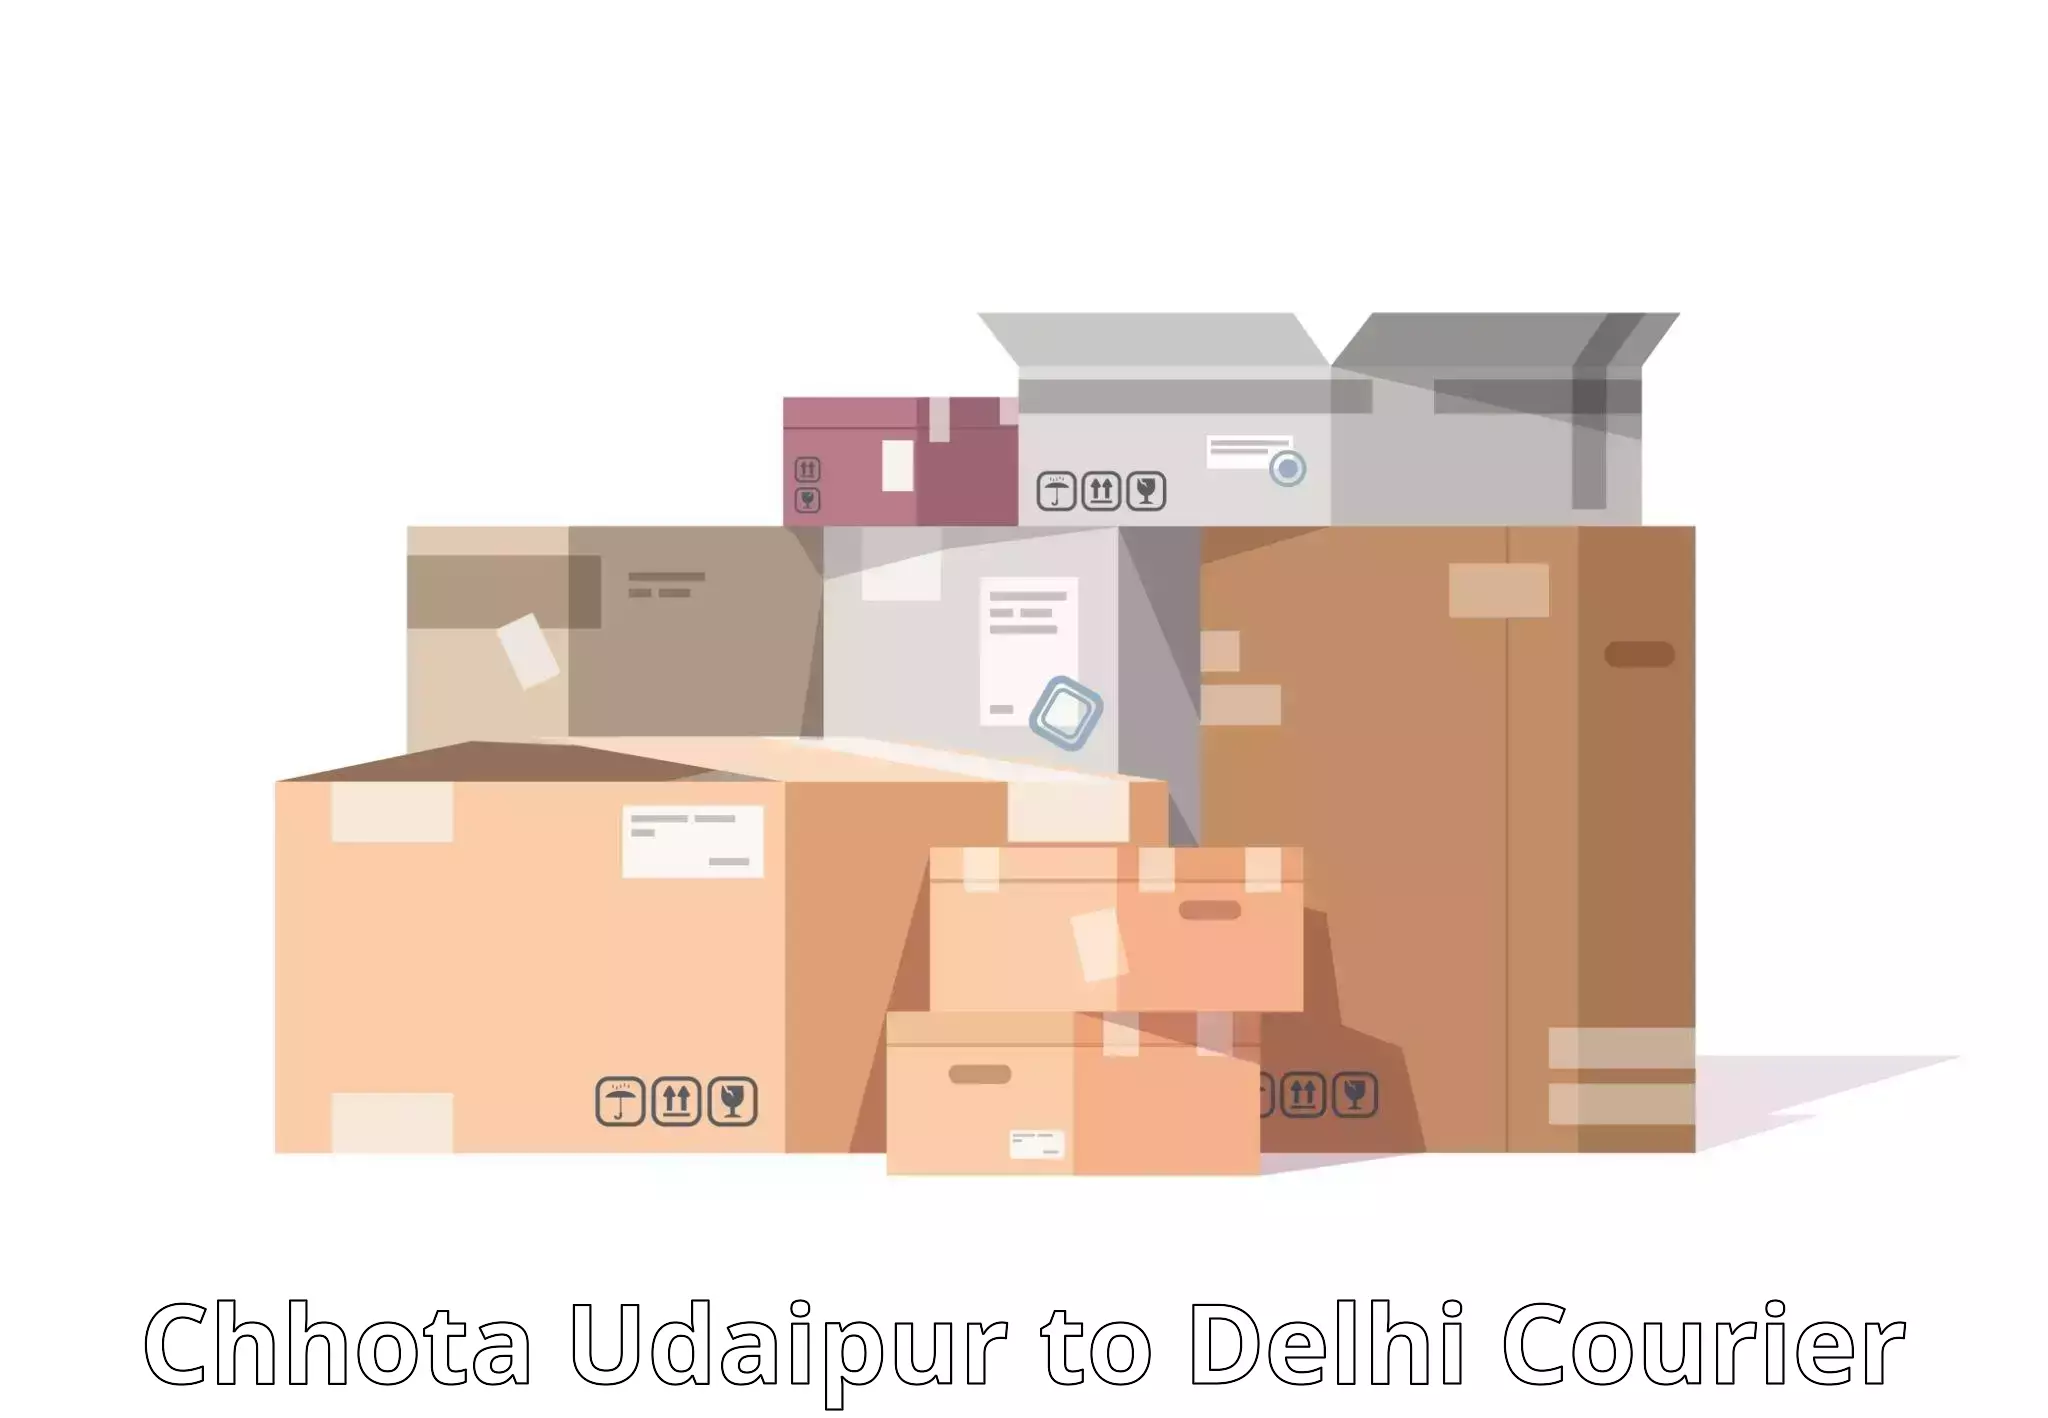 State-of-the-art courier technology in Chhota Udaipur to Jawaharlal Nehru University New Delhi